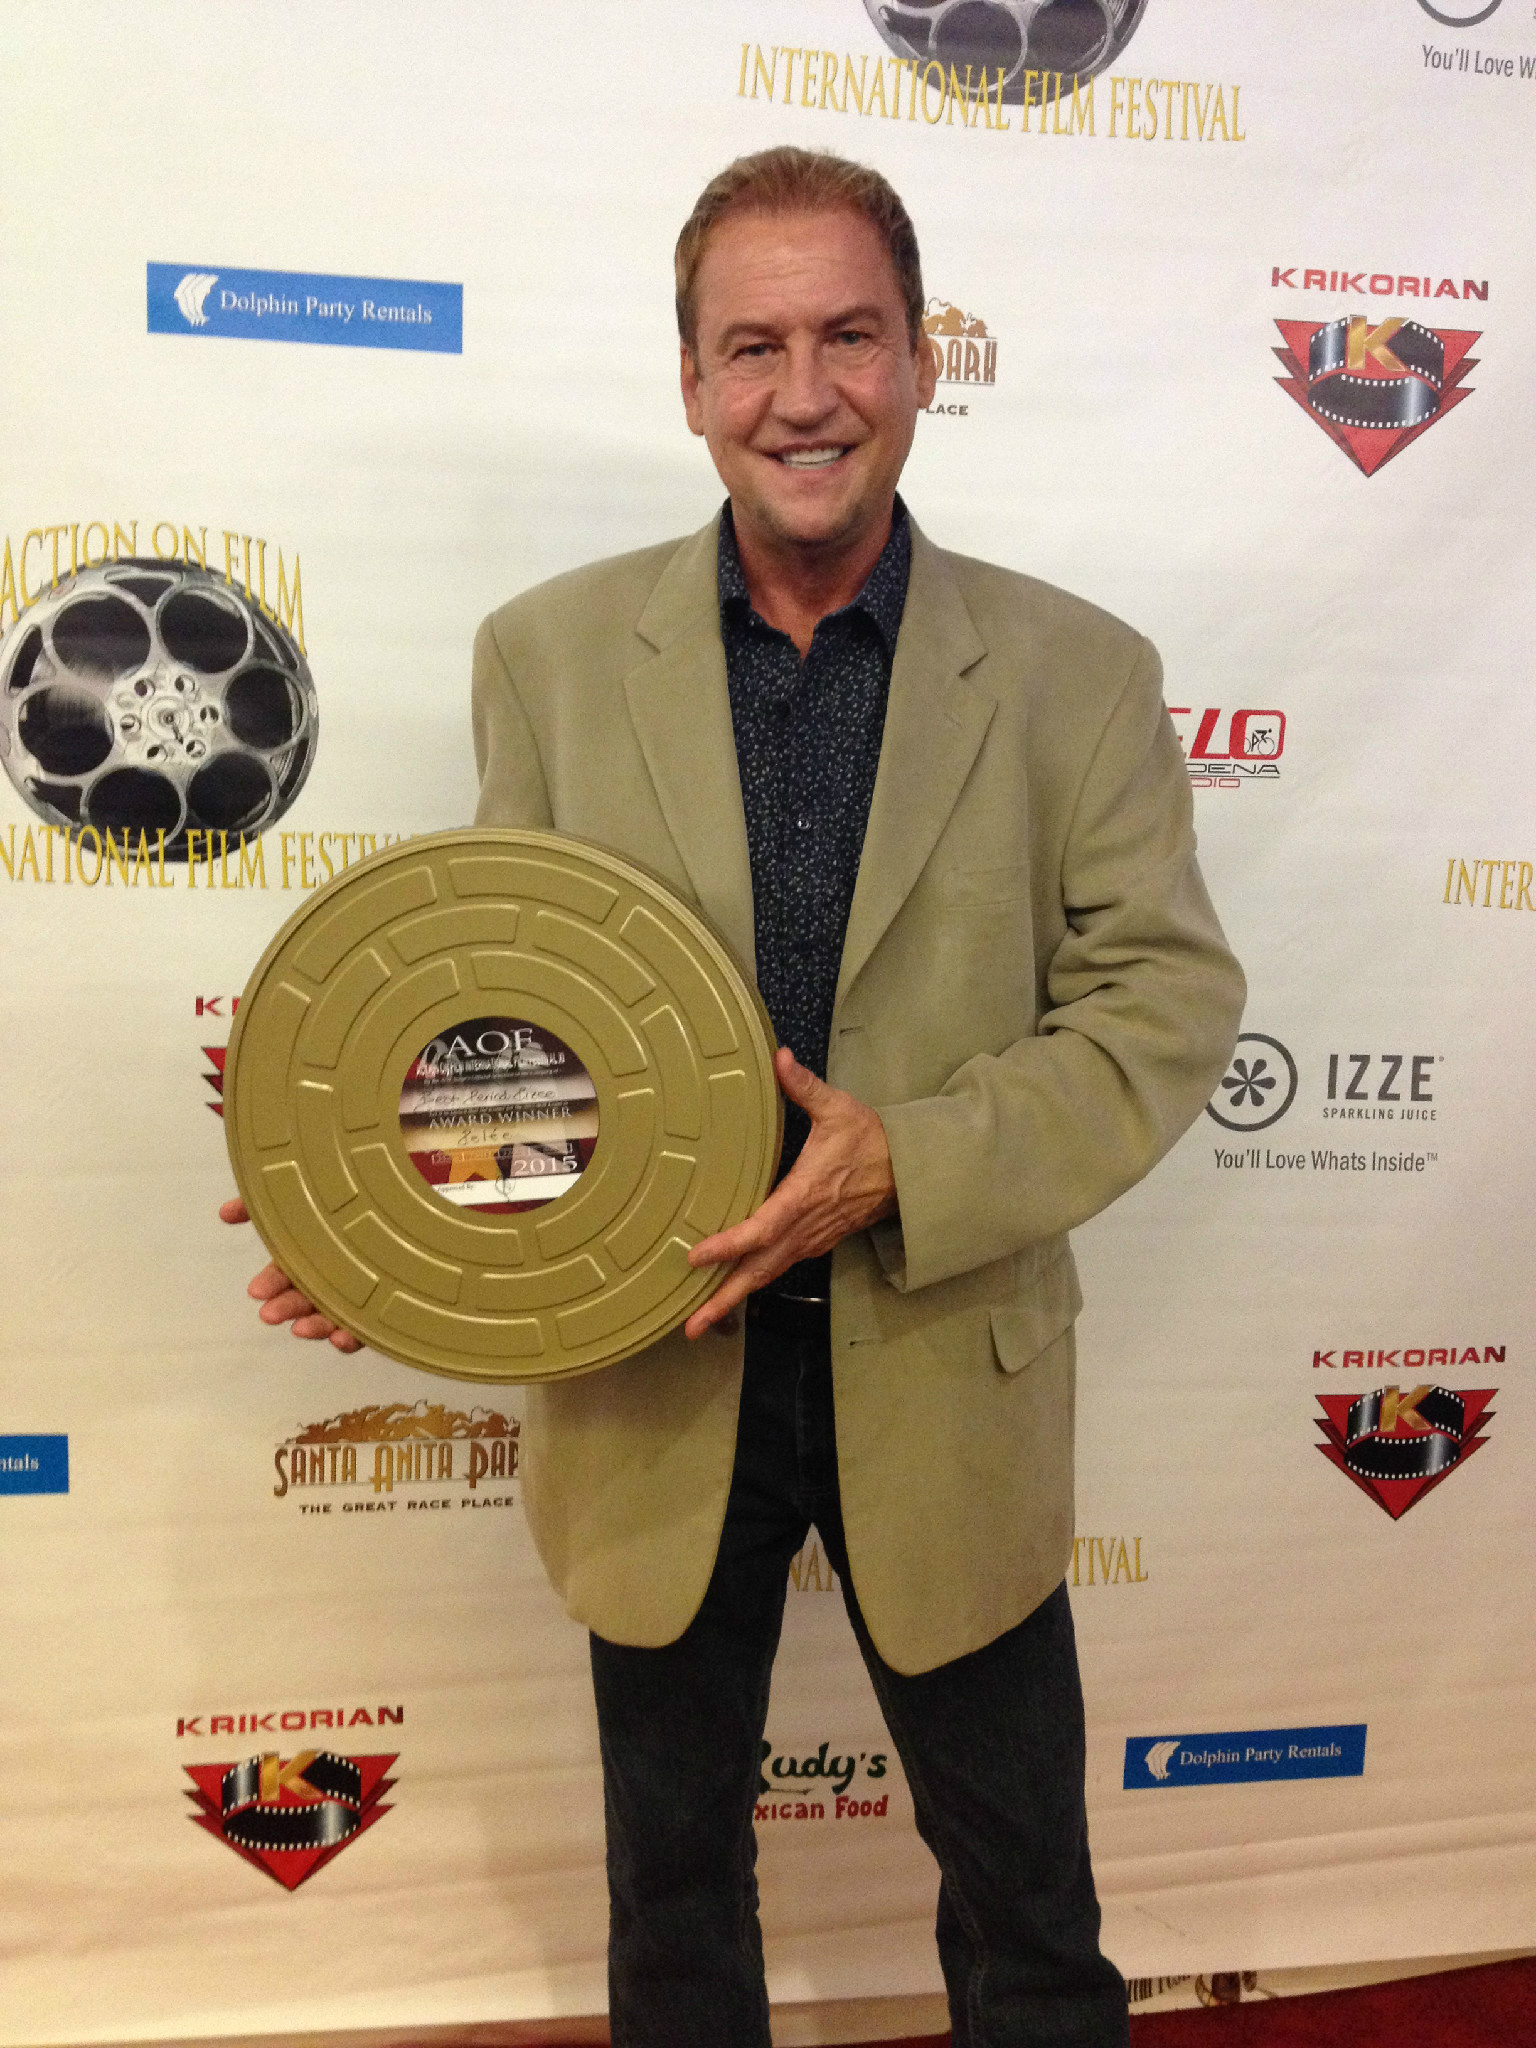 Winning for Pelée - Best Period Piece Feature for Pelée at the 2015 Action On Film International Film Festival Writers Awards.